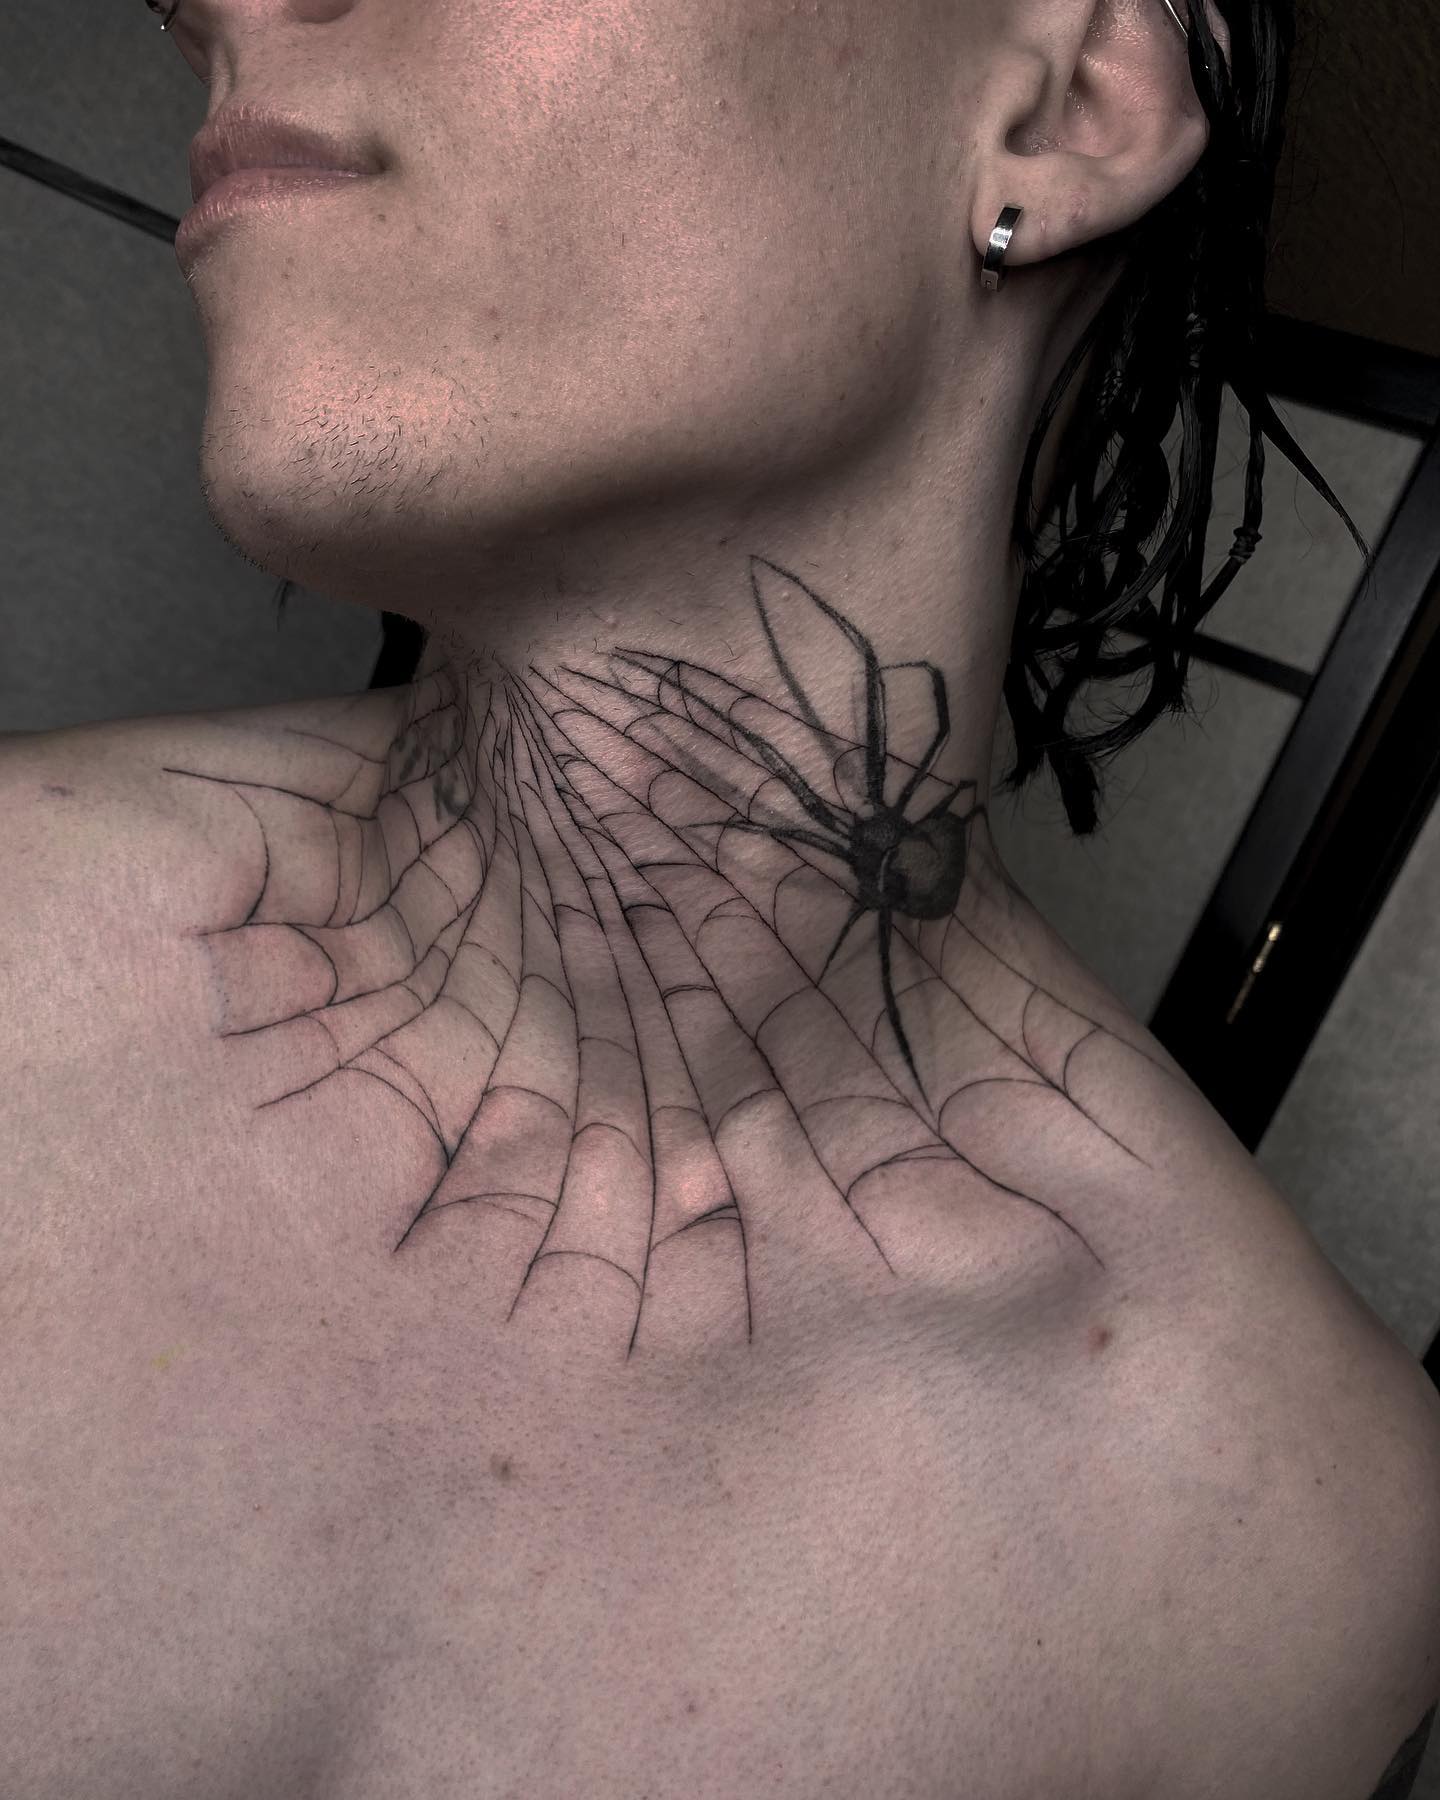 This neck idea is fun and bold at the same time. If you fancy larger tattoos and you’re into cool ideas + you’ve overcome your fear of insects, this will suit you.